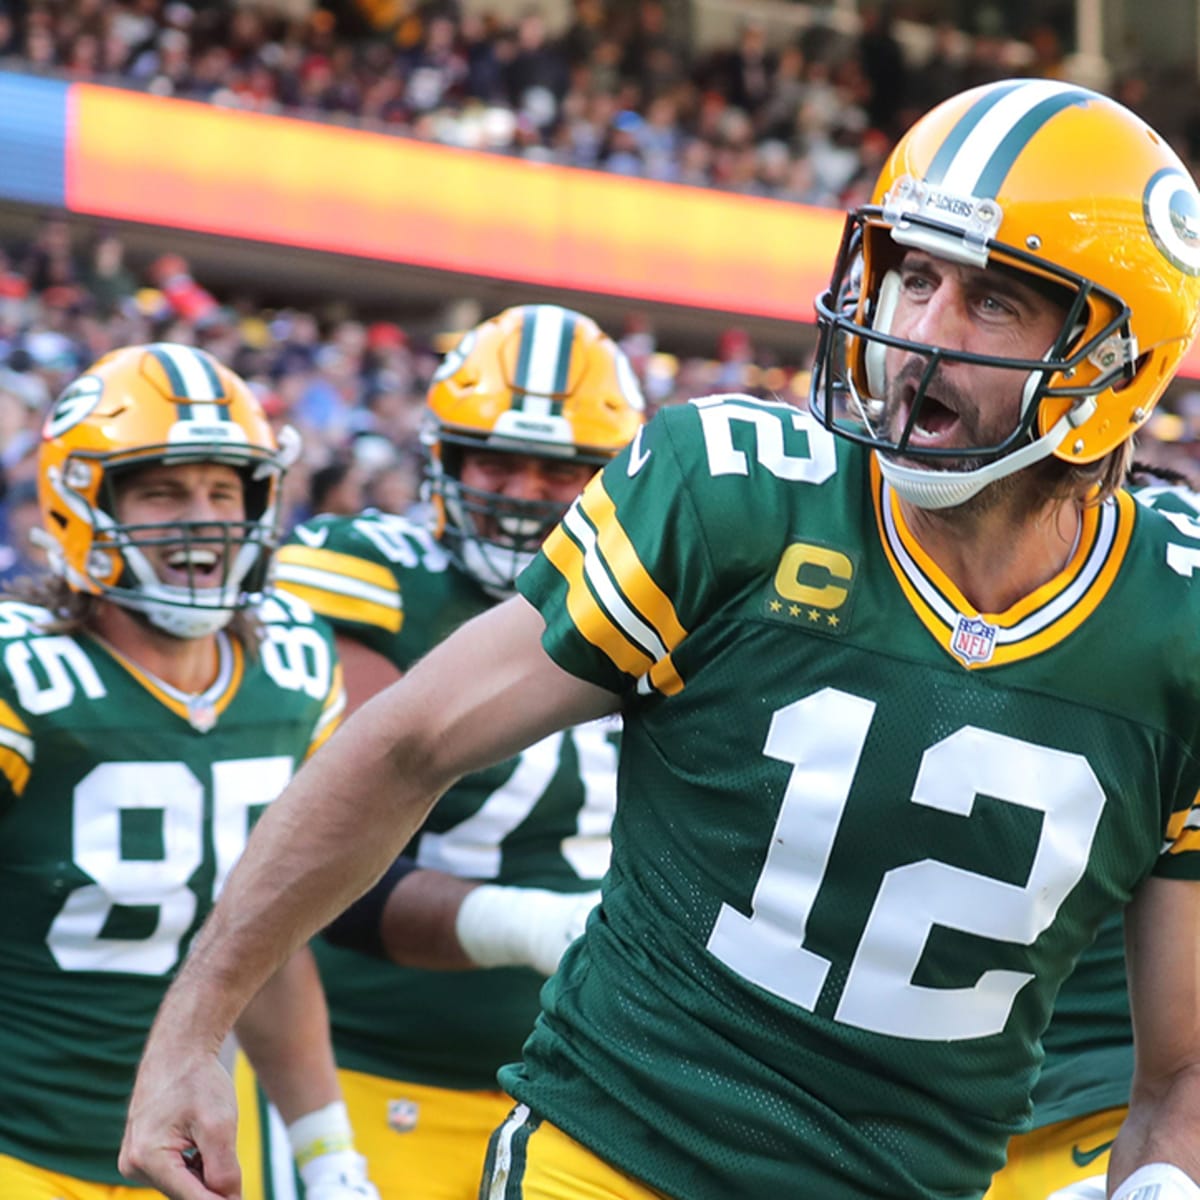 Aaron Rodgers explains I still own you comment, Tom Brady congratulates him  - Sports Illustrated